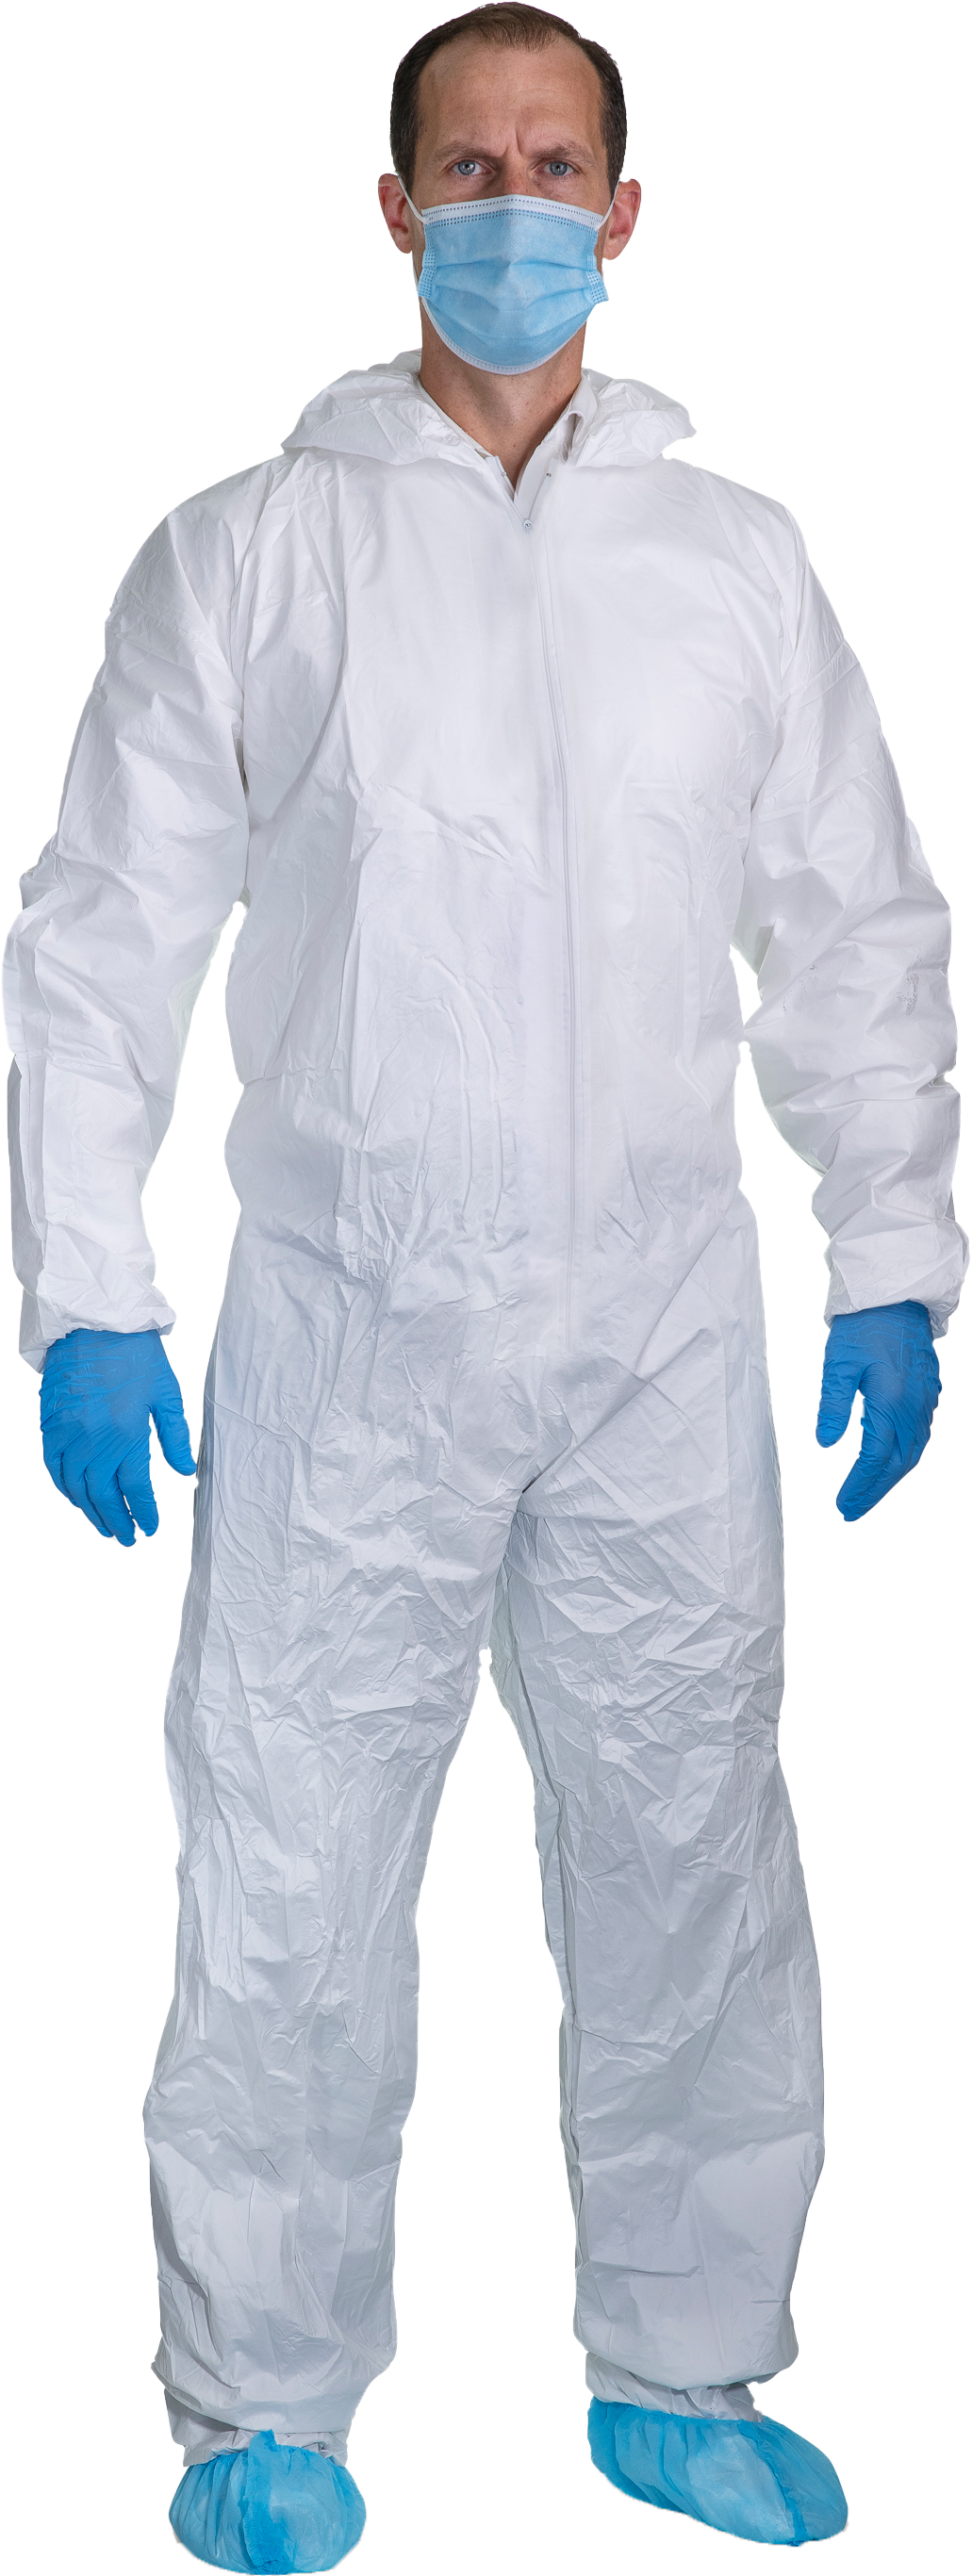 Microporous Protective Tyvek Coverall Suits